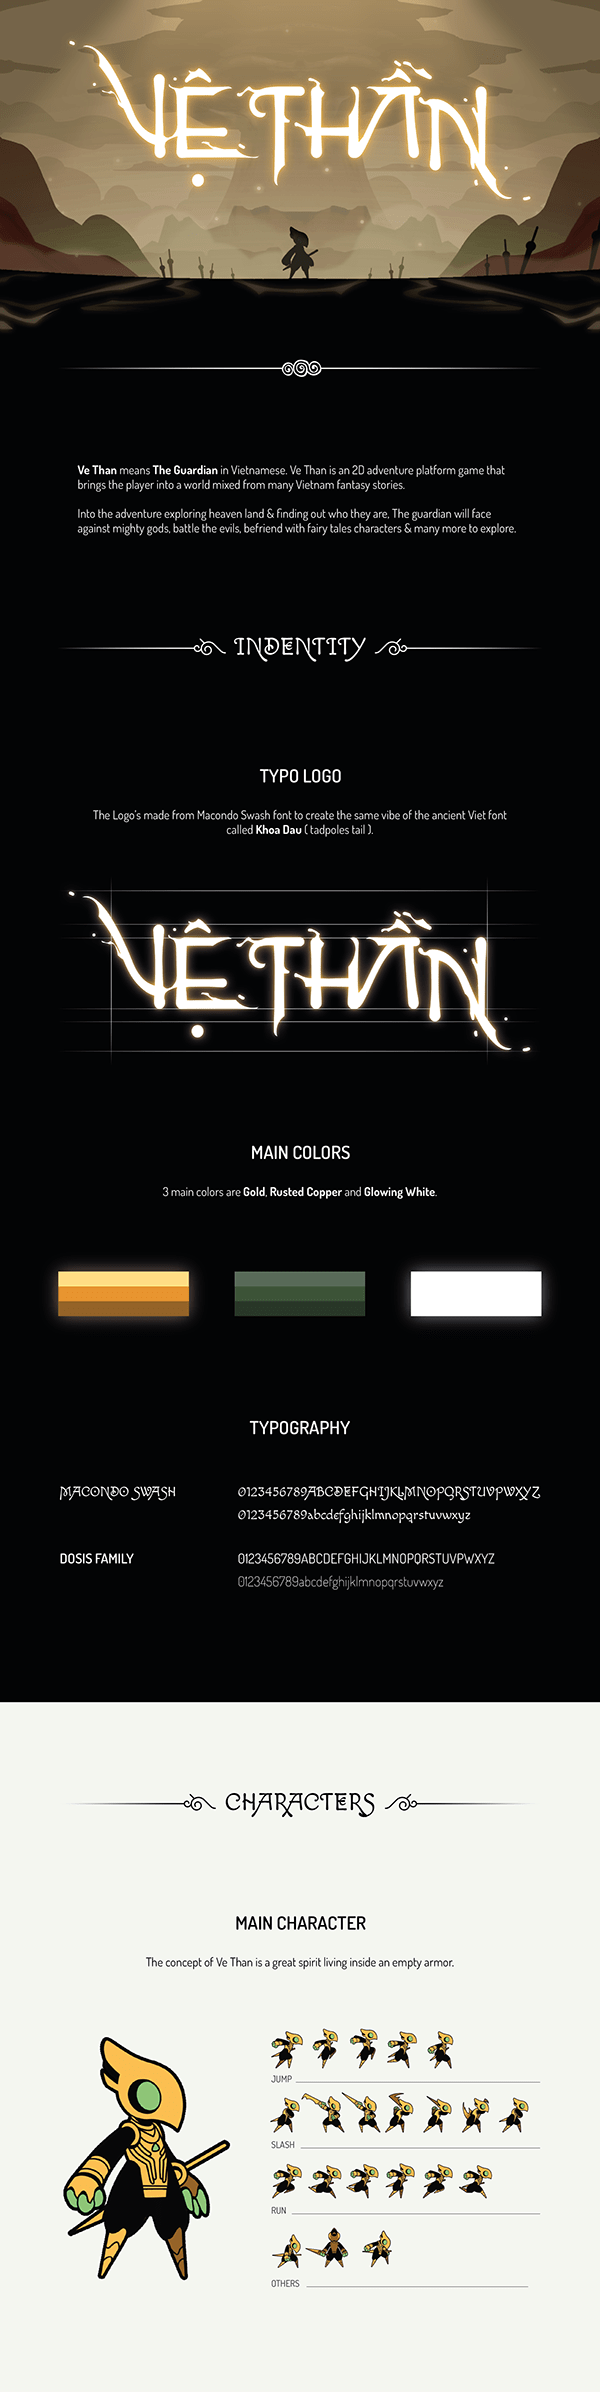 [GAME] VE THAN